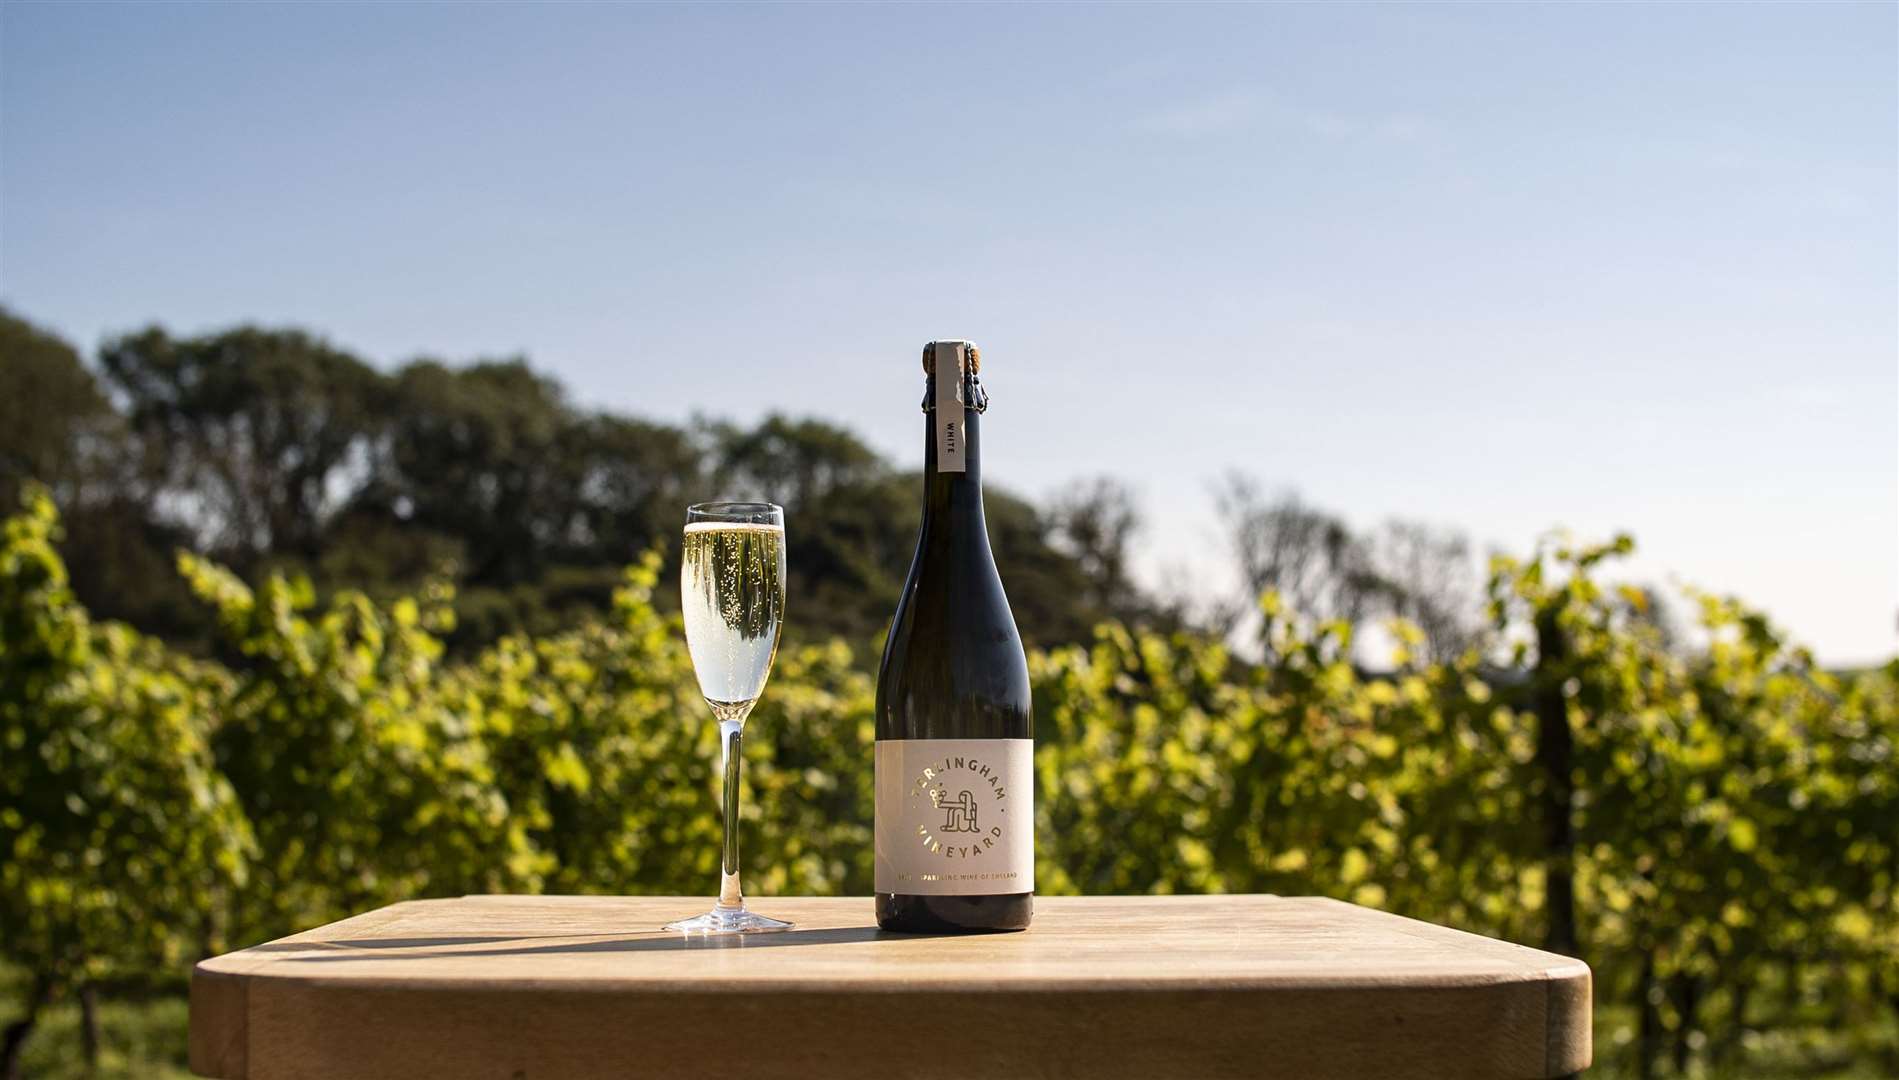 Enjoy a glass of wine overlooking the Terlingham vineyard.  Image: Terlingham Vineyard